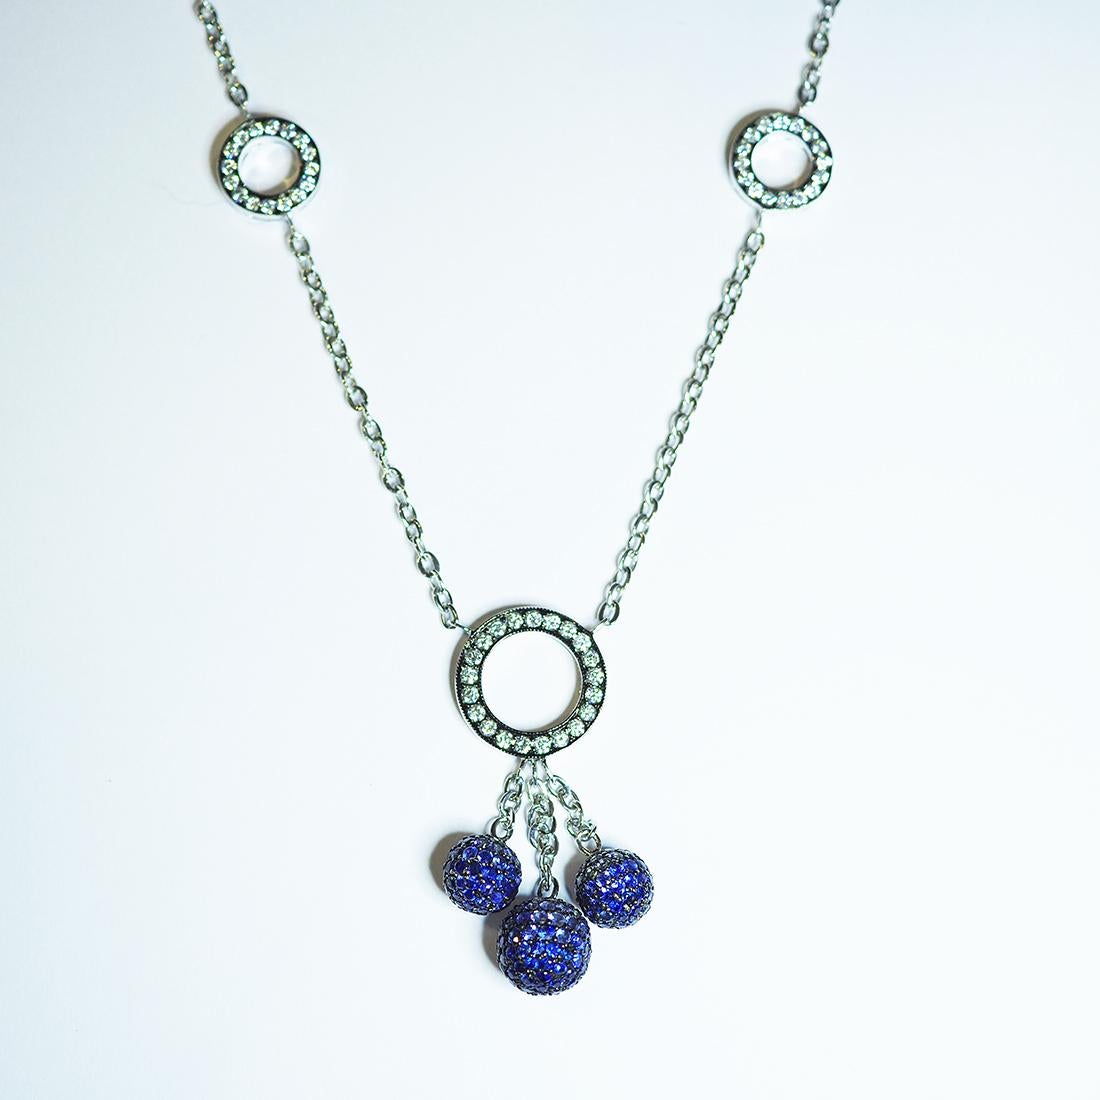 18 Karat White Gold Ball Sapphire Drop Necklace

We design very cute 3 balls sapphire necklace for using in many occasions.You can use in day time and also night time for party.We graduate color of sapphire form light to dark to make it softer